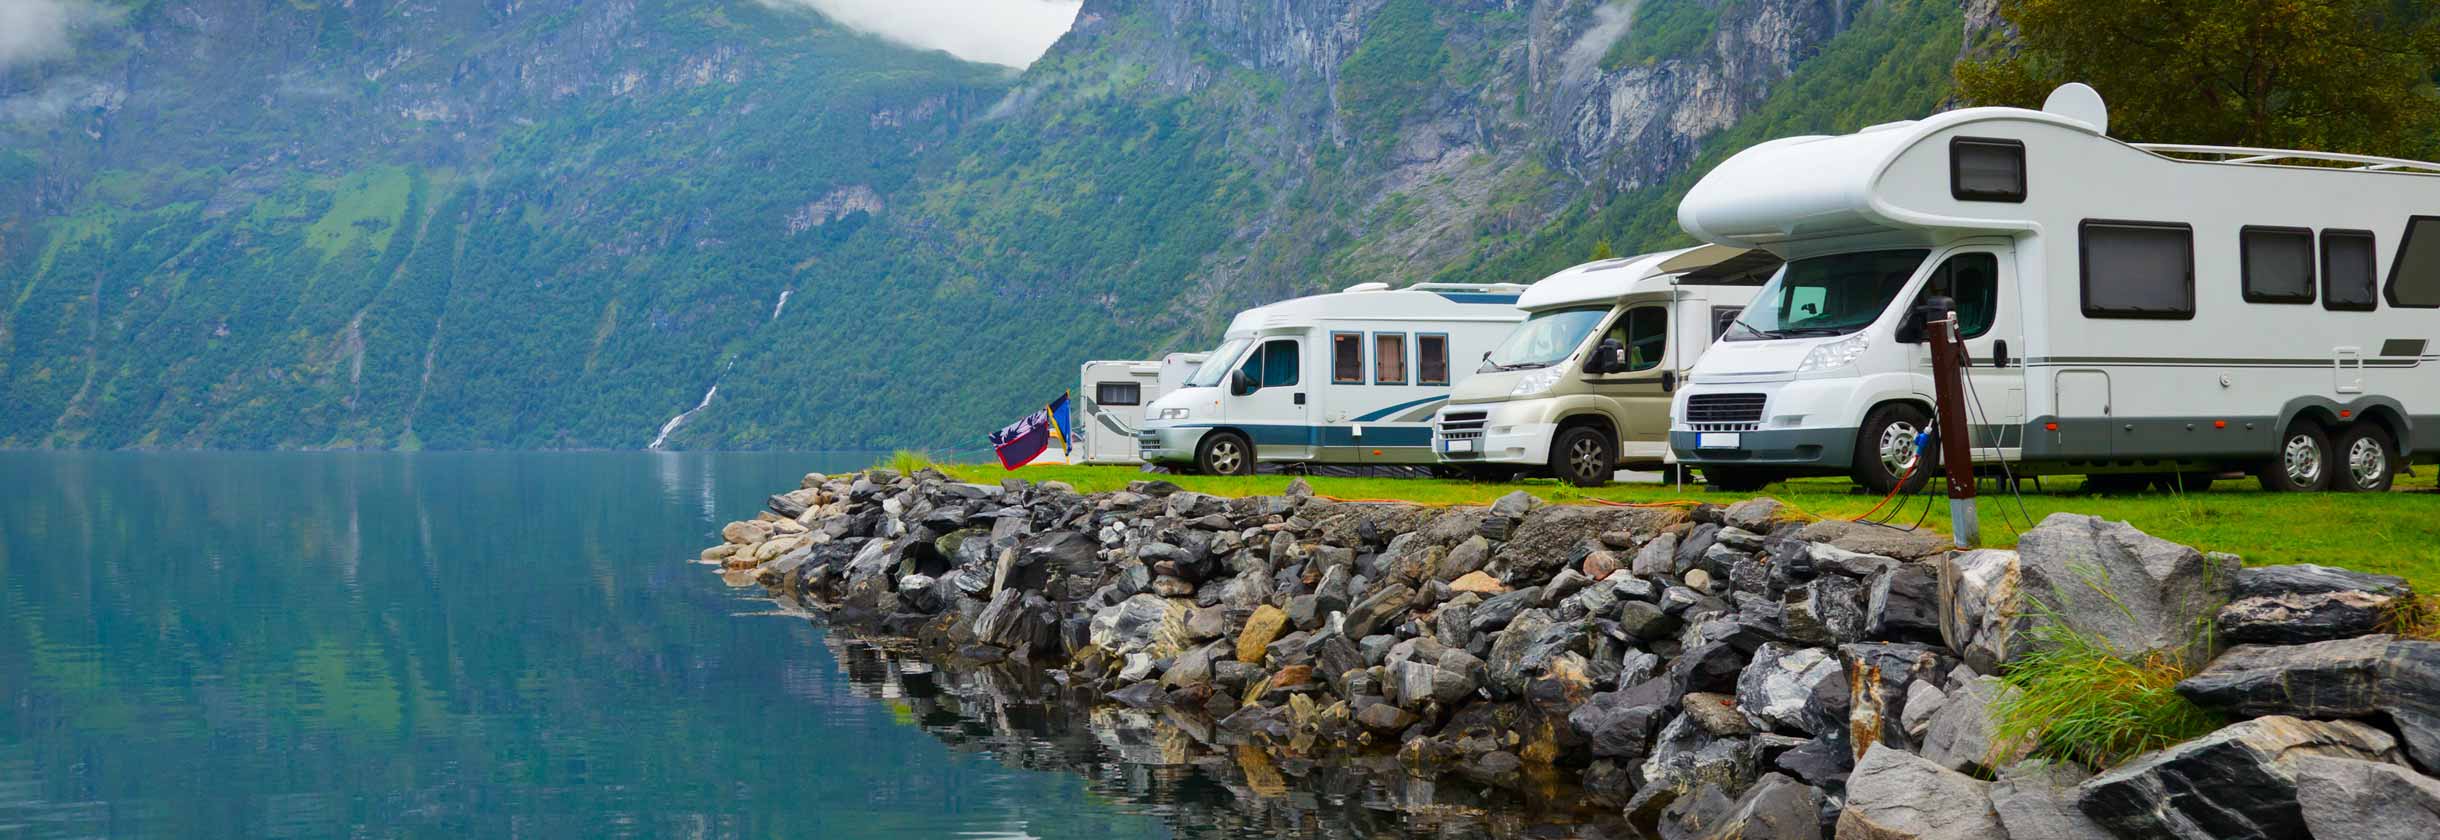 Group of Motorhomes parked by a lake